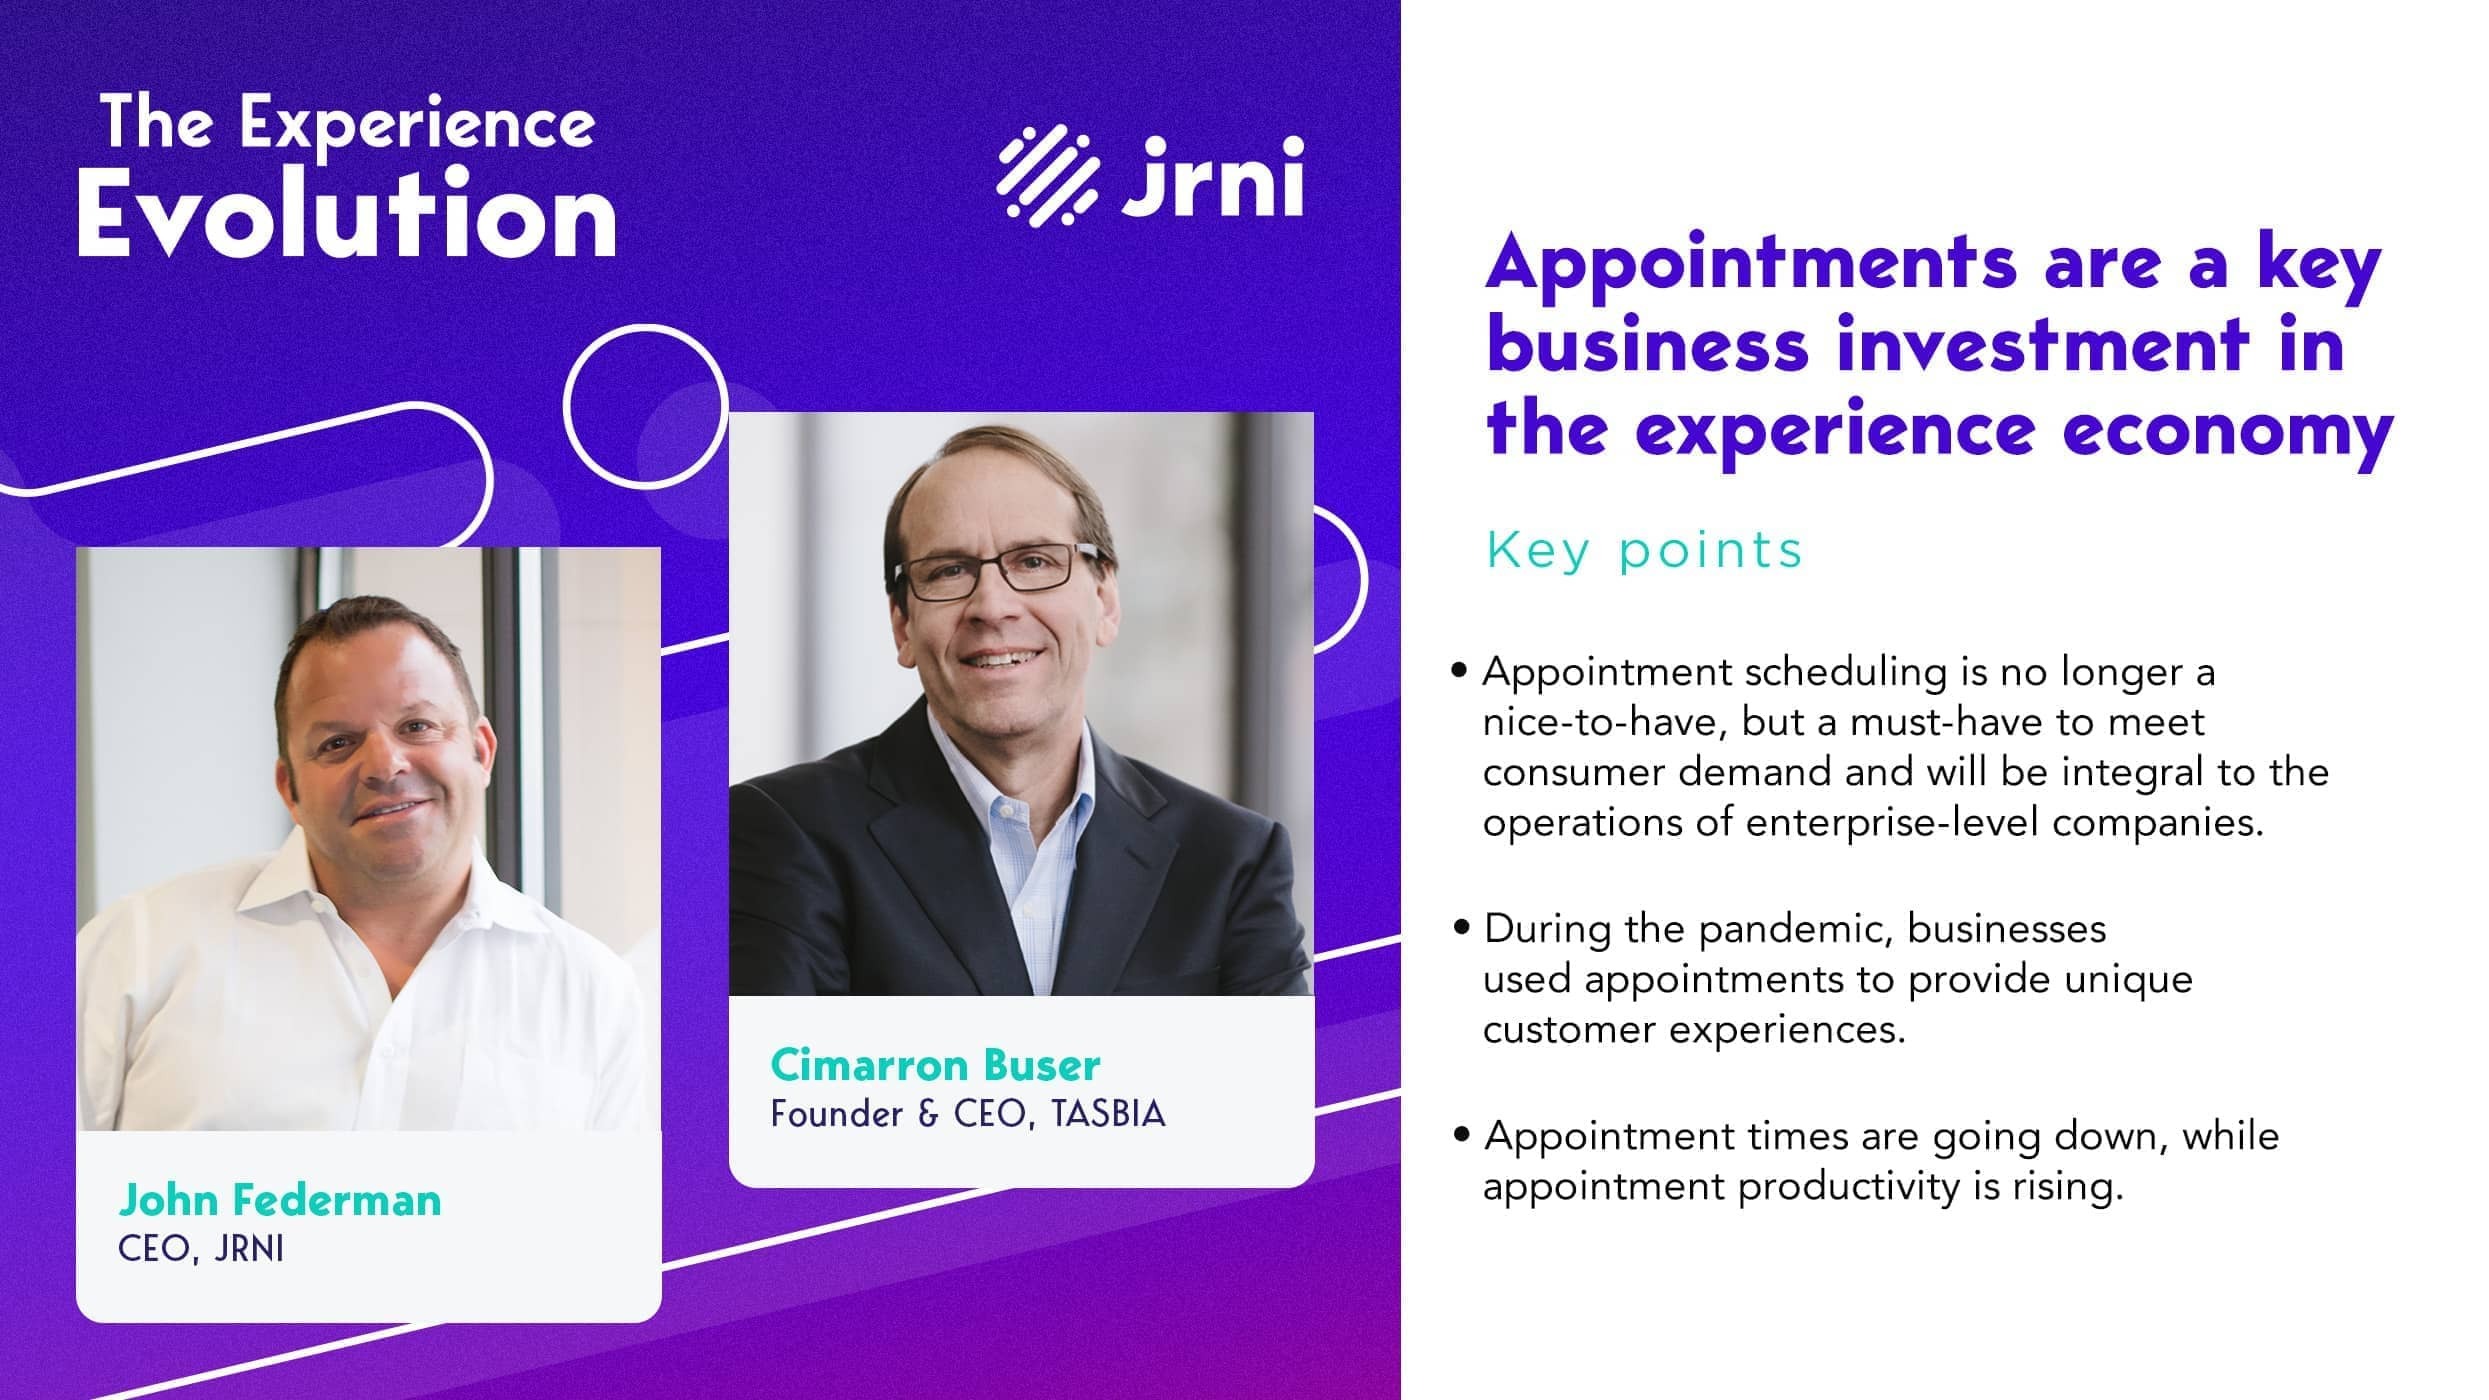 John Federman, CEO of JRNI, and Cimarron Buser, Founder & CEO of TASBIA discuss why appointments are a key business investment in the experience economy.